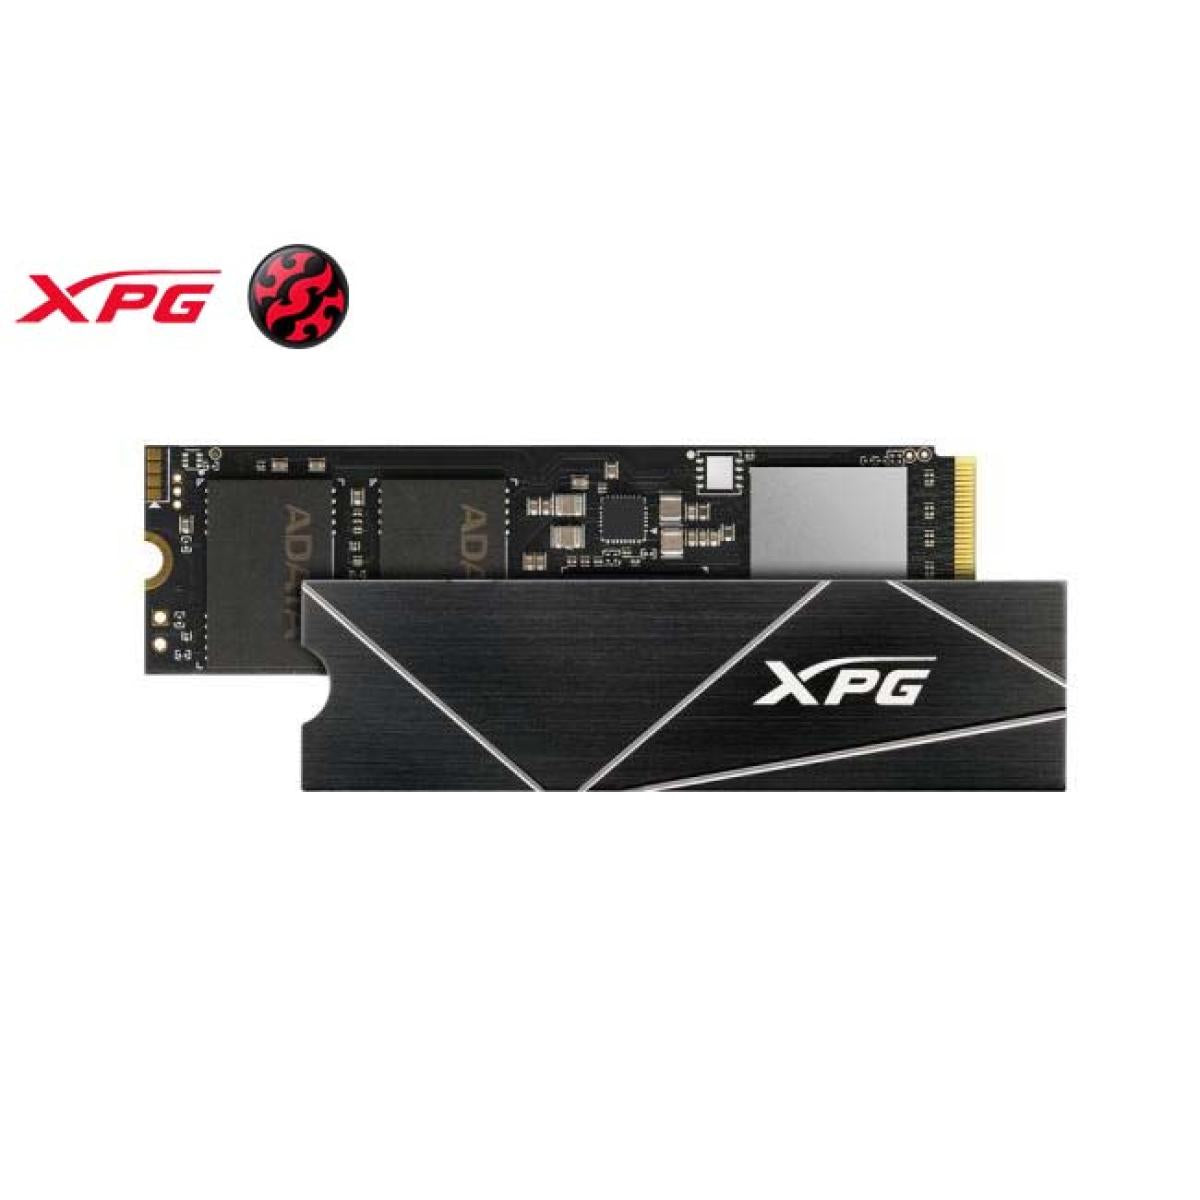 XPG Gammix 70S 1T PCIe 3D NAND PCIe Gen4x4 M.2 2280 NVMe 1.3 R/W up to 2100/1500MB/s SSD (AGAMMIXS70B-1T-C)